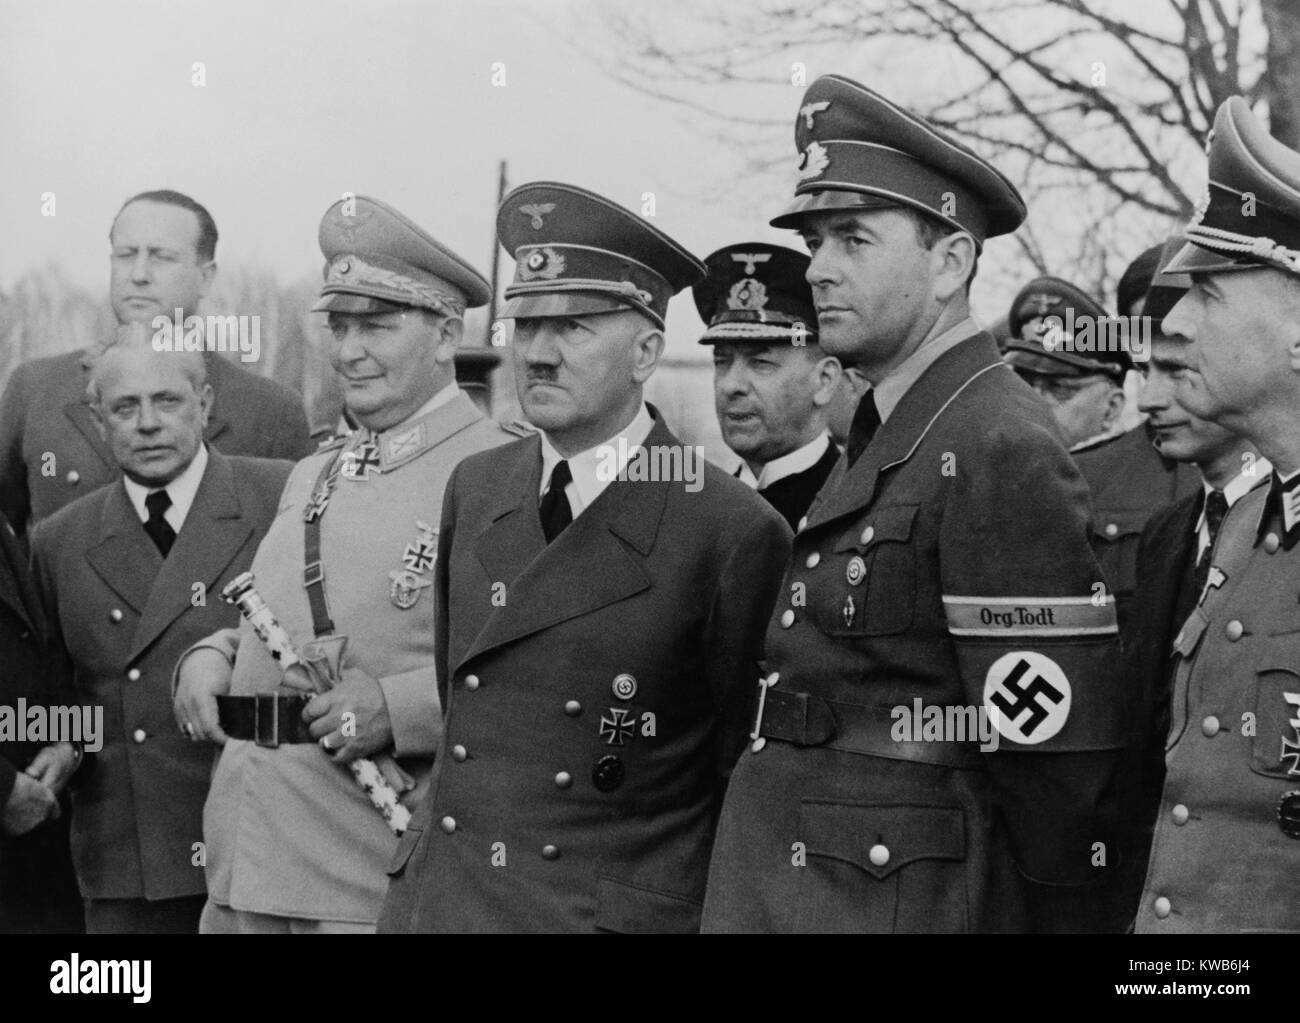 Adolf Hitler, flanked by Hermann Goering, and Albert Speer. Speer was Minister of Armaments and War Production. His 'Org. Tolt' armband refers to German wartime industrial and military engineering works that ran the Nazi slave labor workforce. April 10, 1942. World War 2. (BSLOC 2014 8 171) Stock Photo